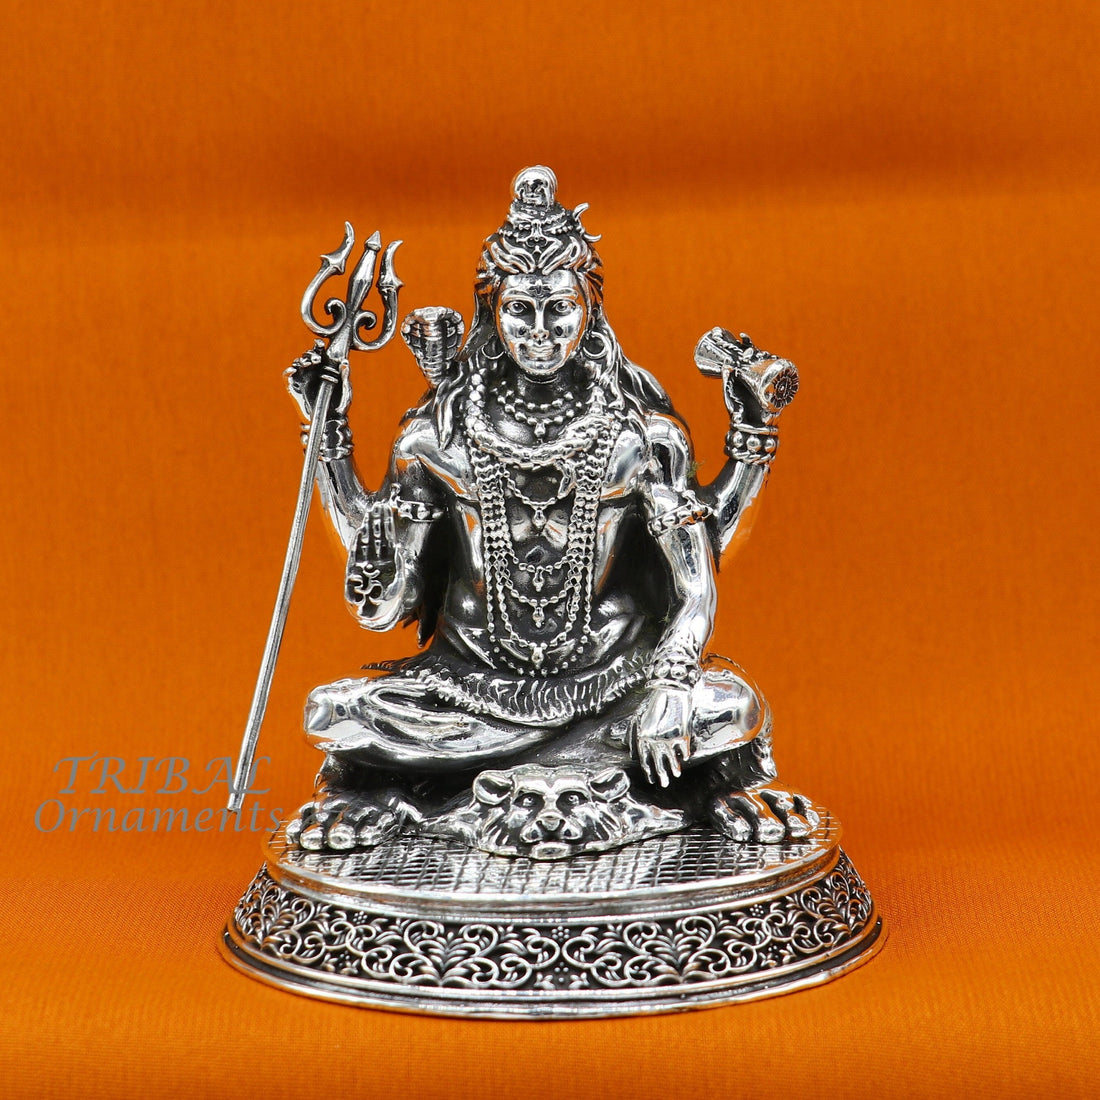 925 Sterling silver handmade hindu idols Lord Shiva with trident holy divine statue figurine, puja articles best gift silver article art573 - TRIBAL ORNAMENTS